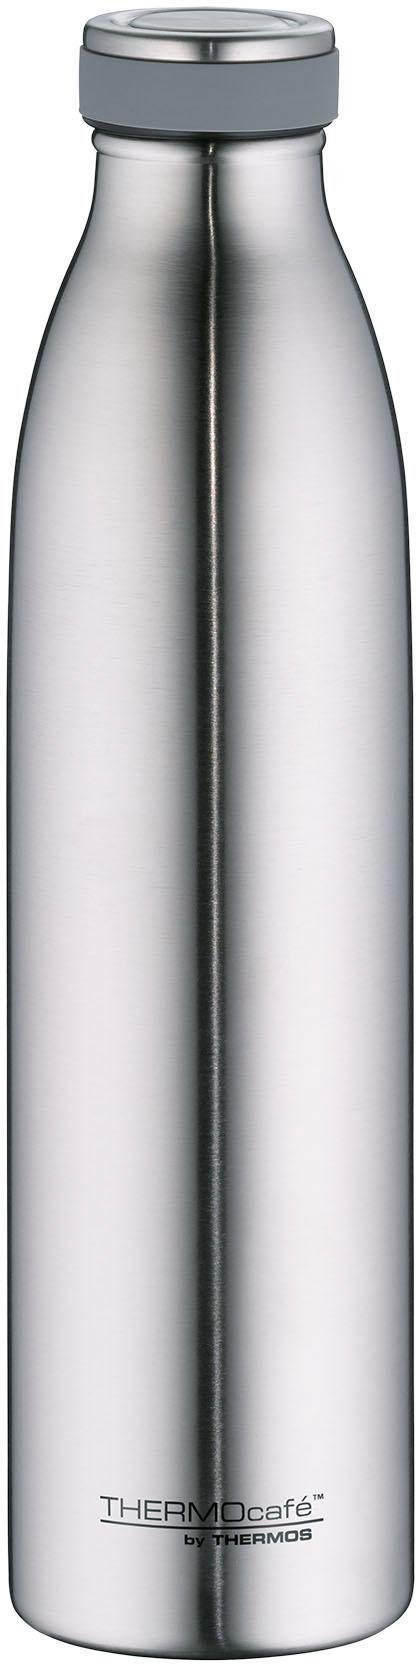 THERMOS Thermoflasche TC Bottle, Edelstahl